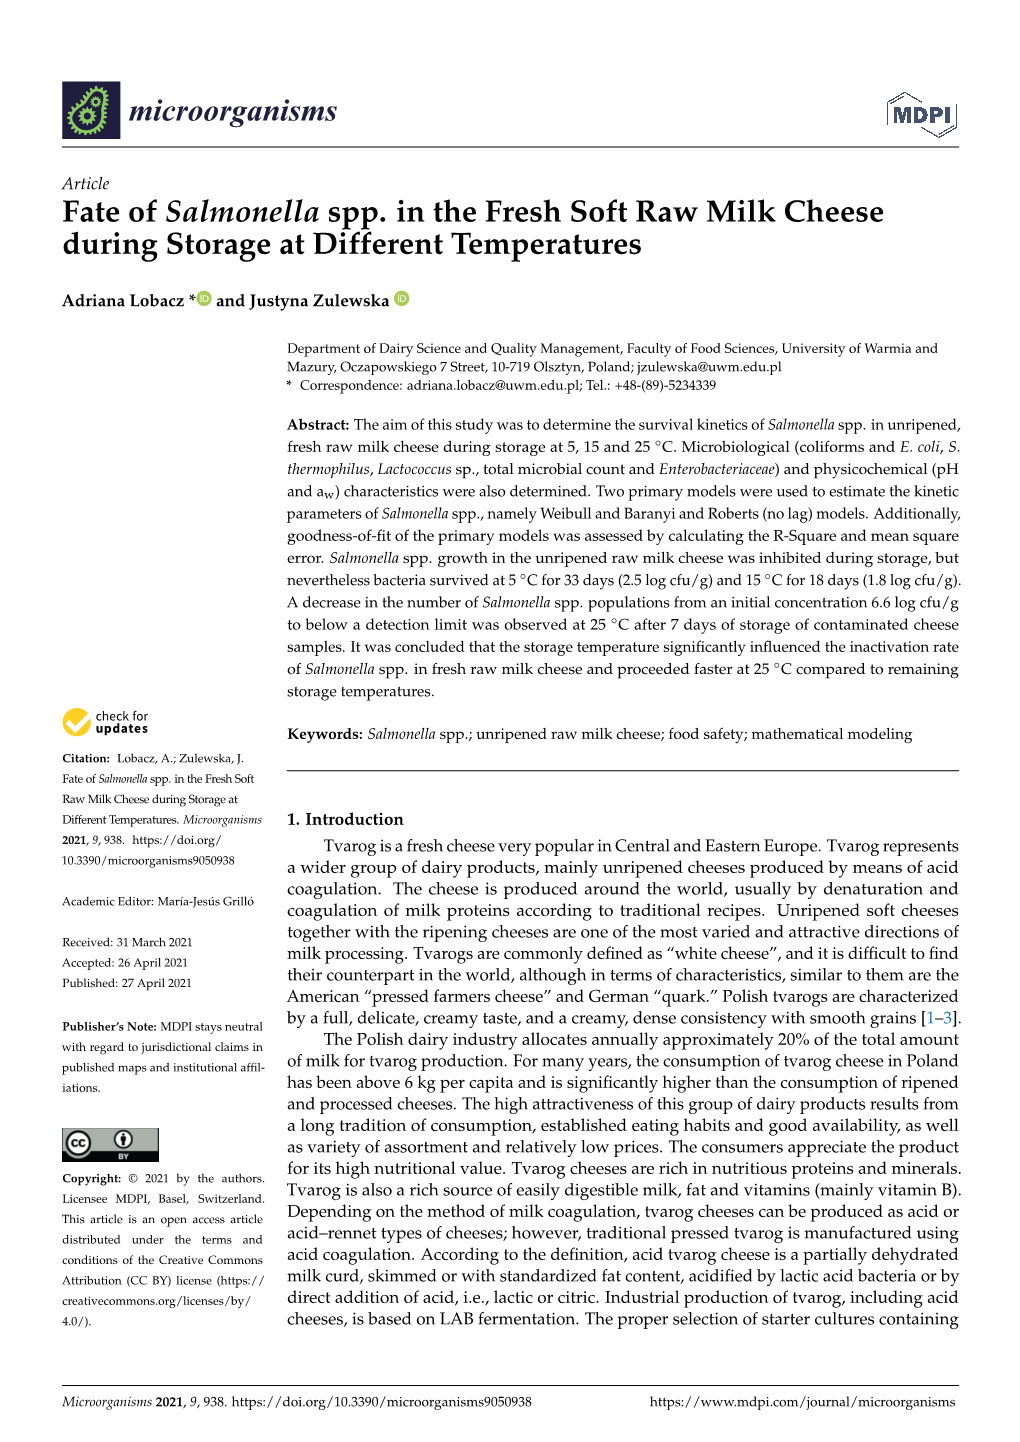 Fate of Salmonella Spp. in the Fresh Soft Raw Milk Cheese During Storage at Different Temperatures